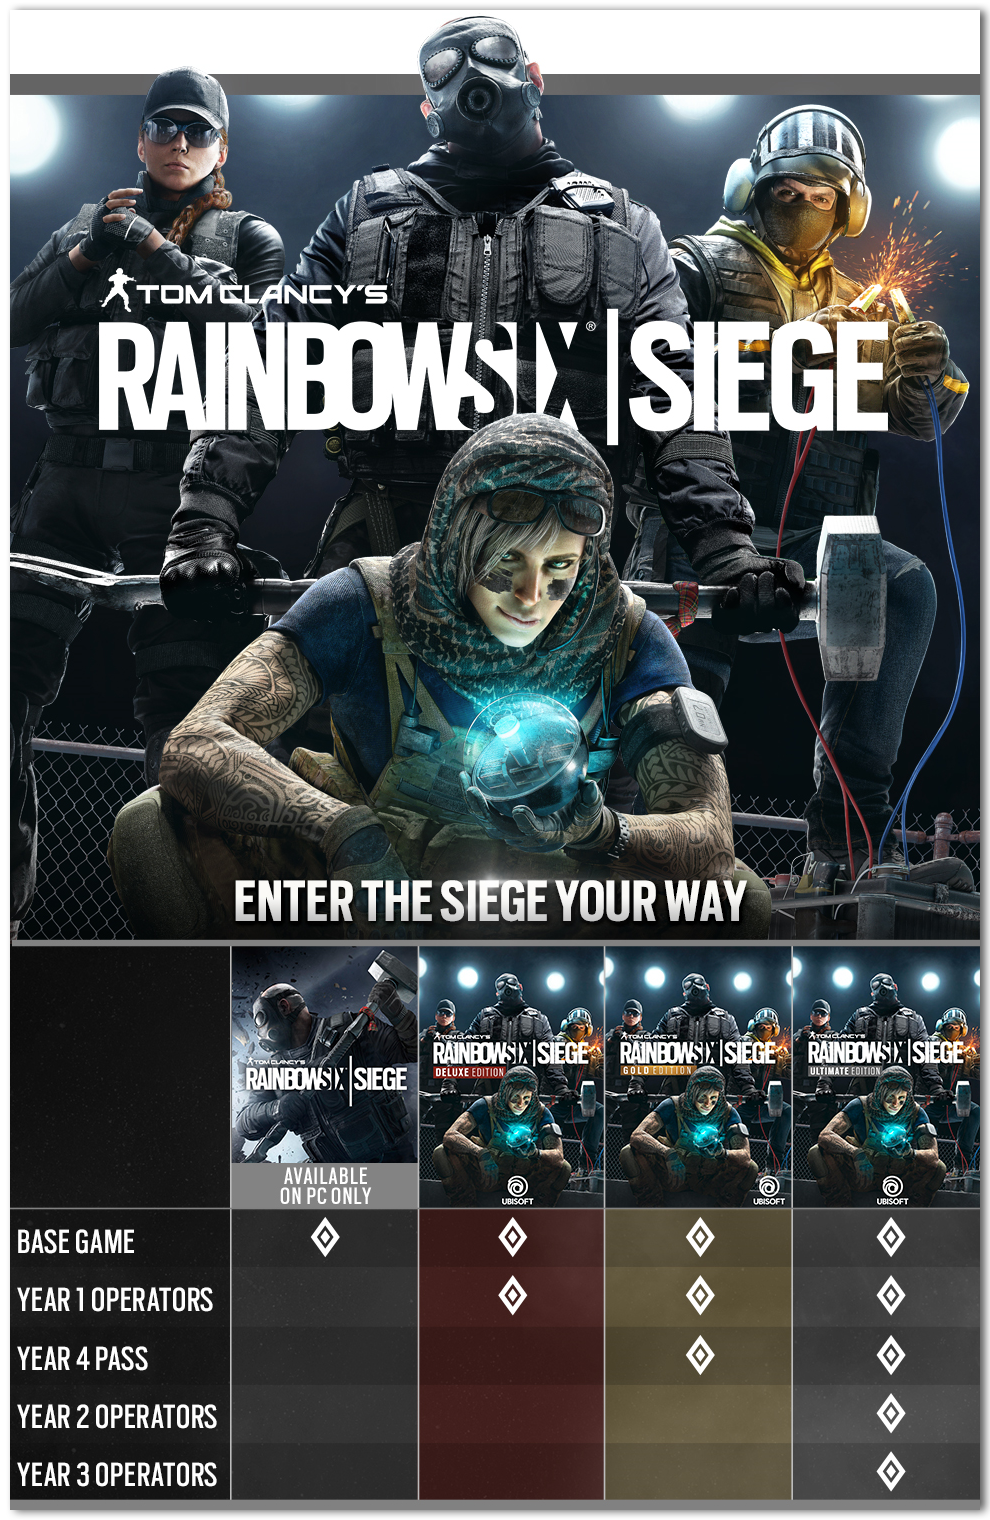 Differences between editions of Rainbow Six Siege | Ubisoft Help